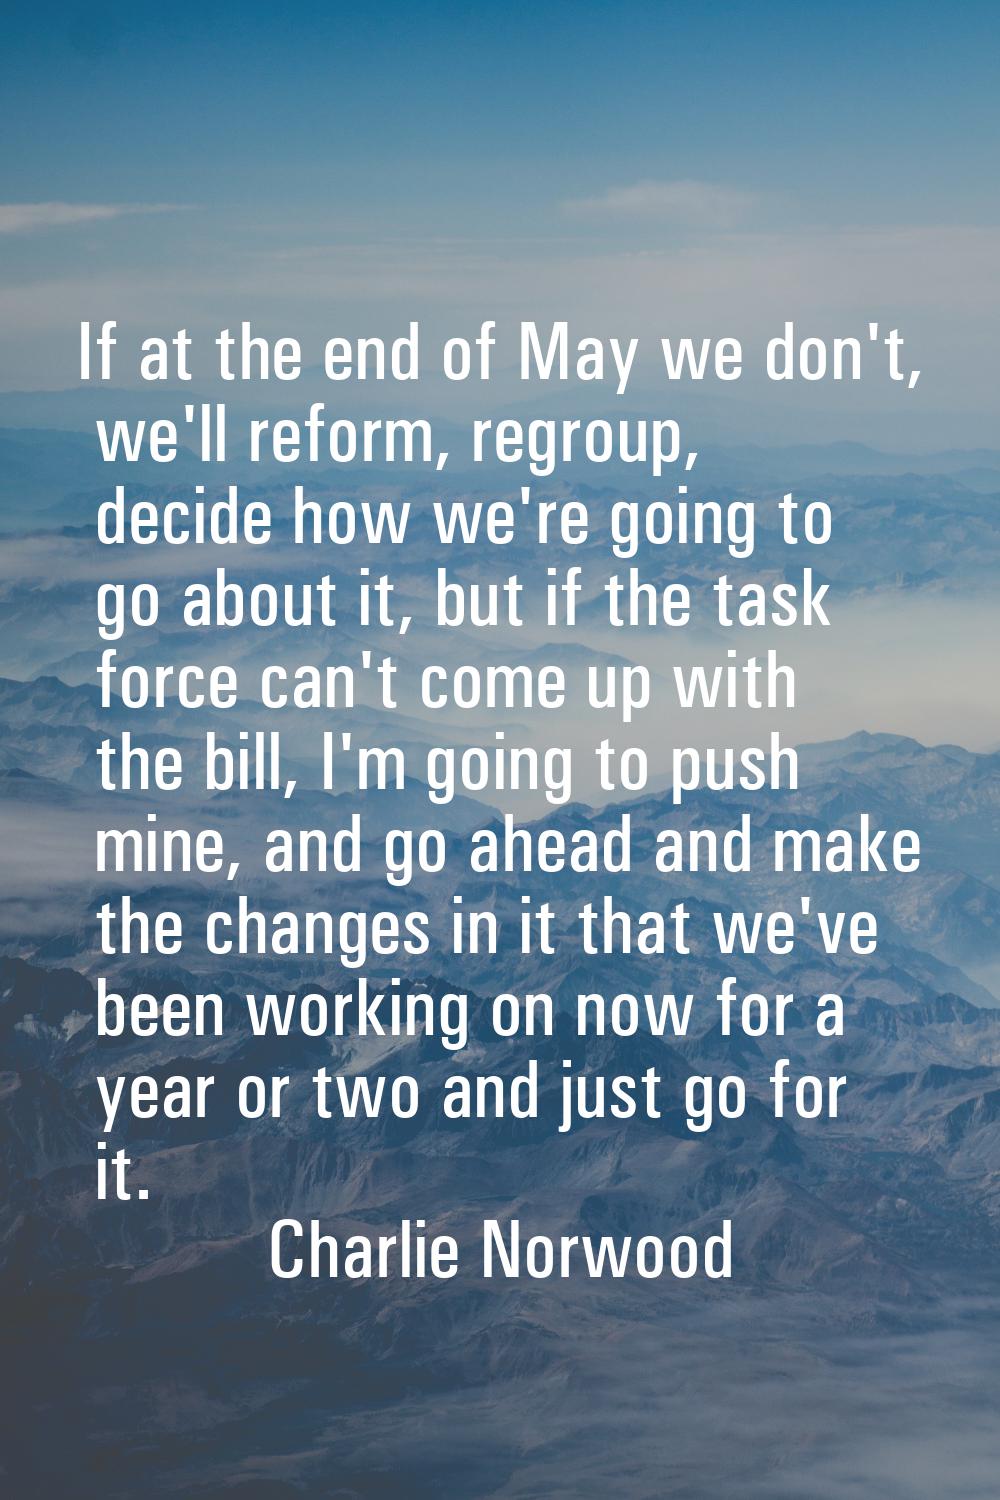 If at the end of May we don't, we'll reform, regroup, decide how we're going to go about it, but if